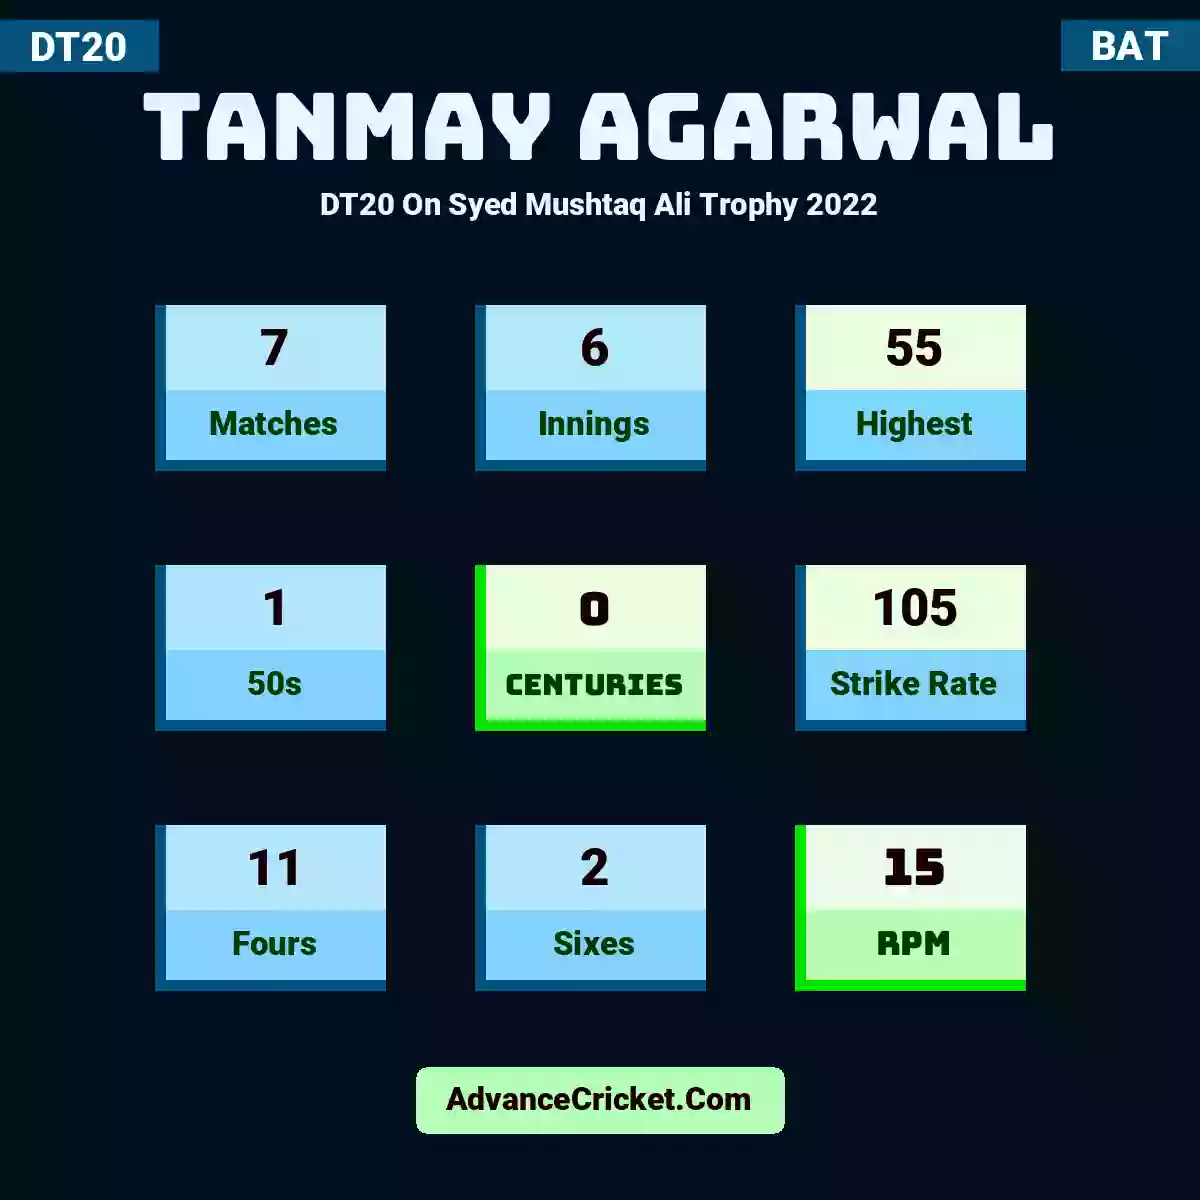 Tanmay Agarwal DT20  On Syed Mushtaq Ali Trophy 2022, Tanmay Agarwal played 7 matches, scored 55 runs as highest, 1 half-centuries, and 0 centuries, with a strike rate of 105. T.Agarwal hit 11 fours and 2 sixes, with an RPM of 15.